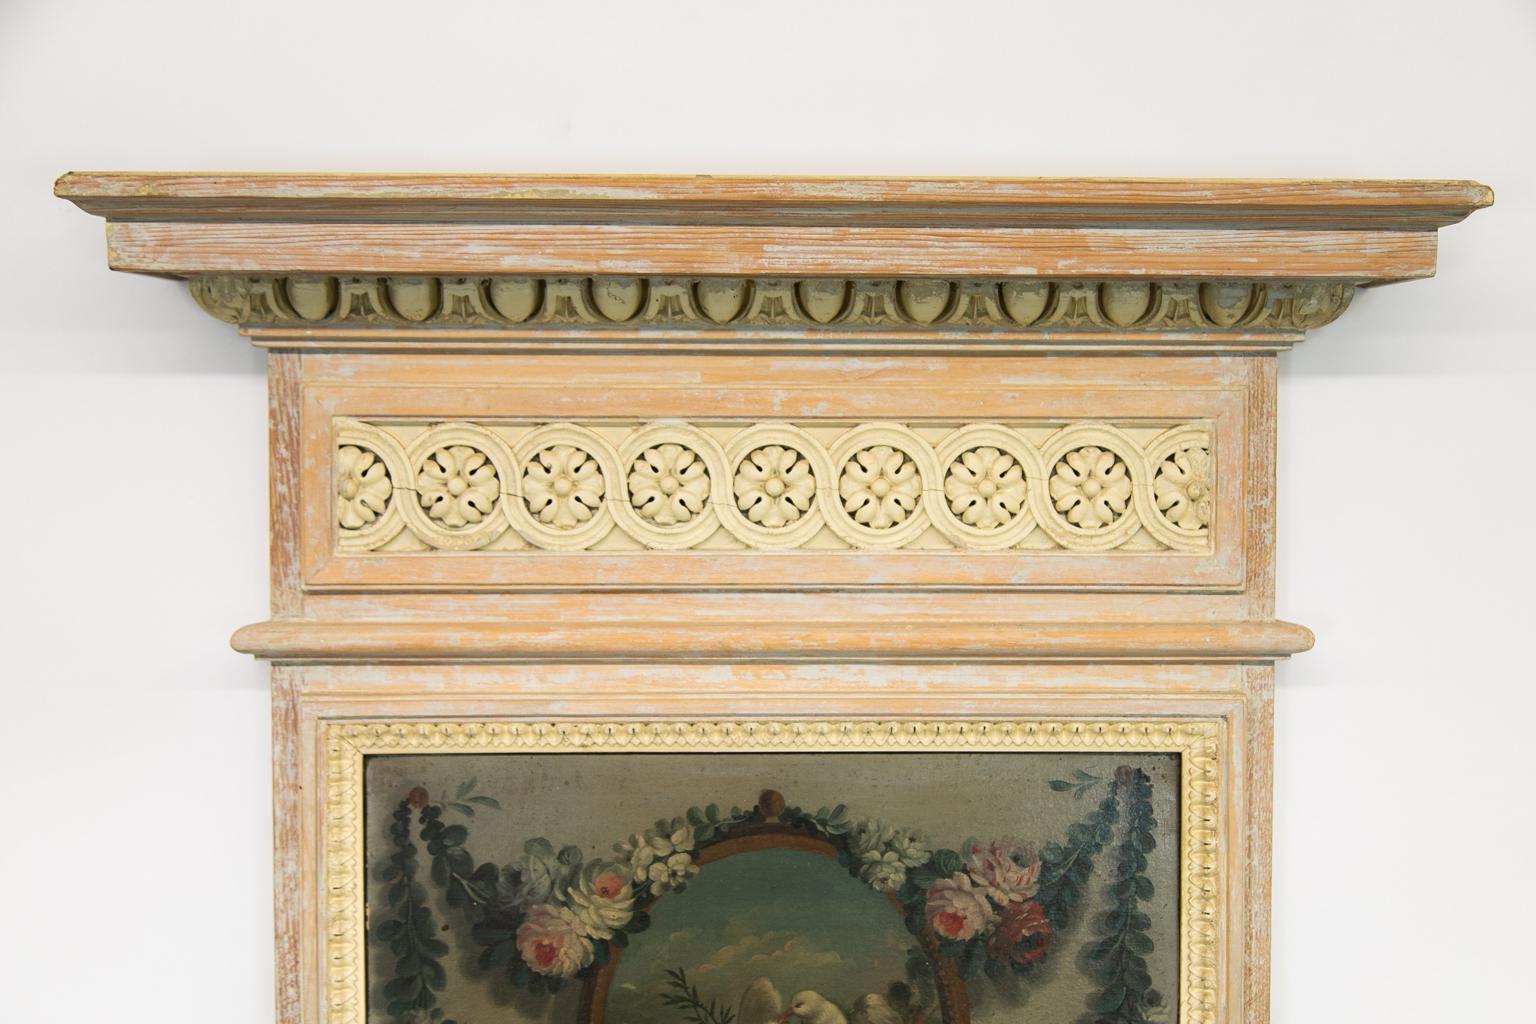 This mirror is painted with a cream color paint that has been intentionally distressed. The cornice has egg and dart molding carved in high relief. The frieze has a carved interlaced floral motif framed by rectangular molding. The painting above the